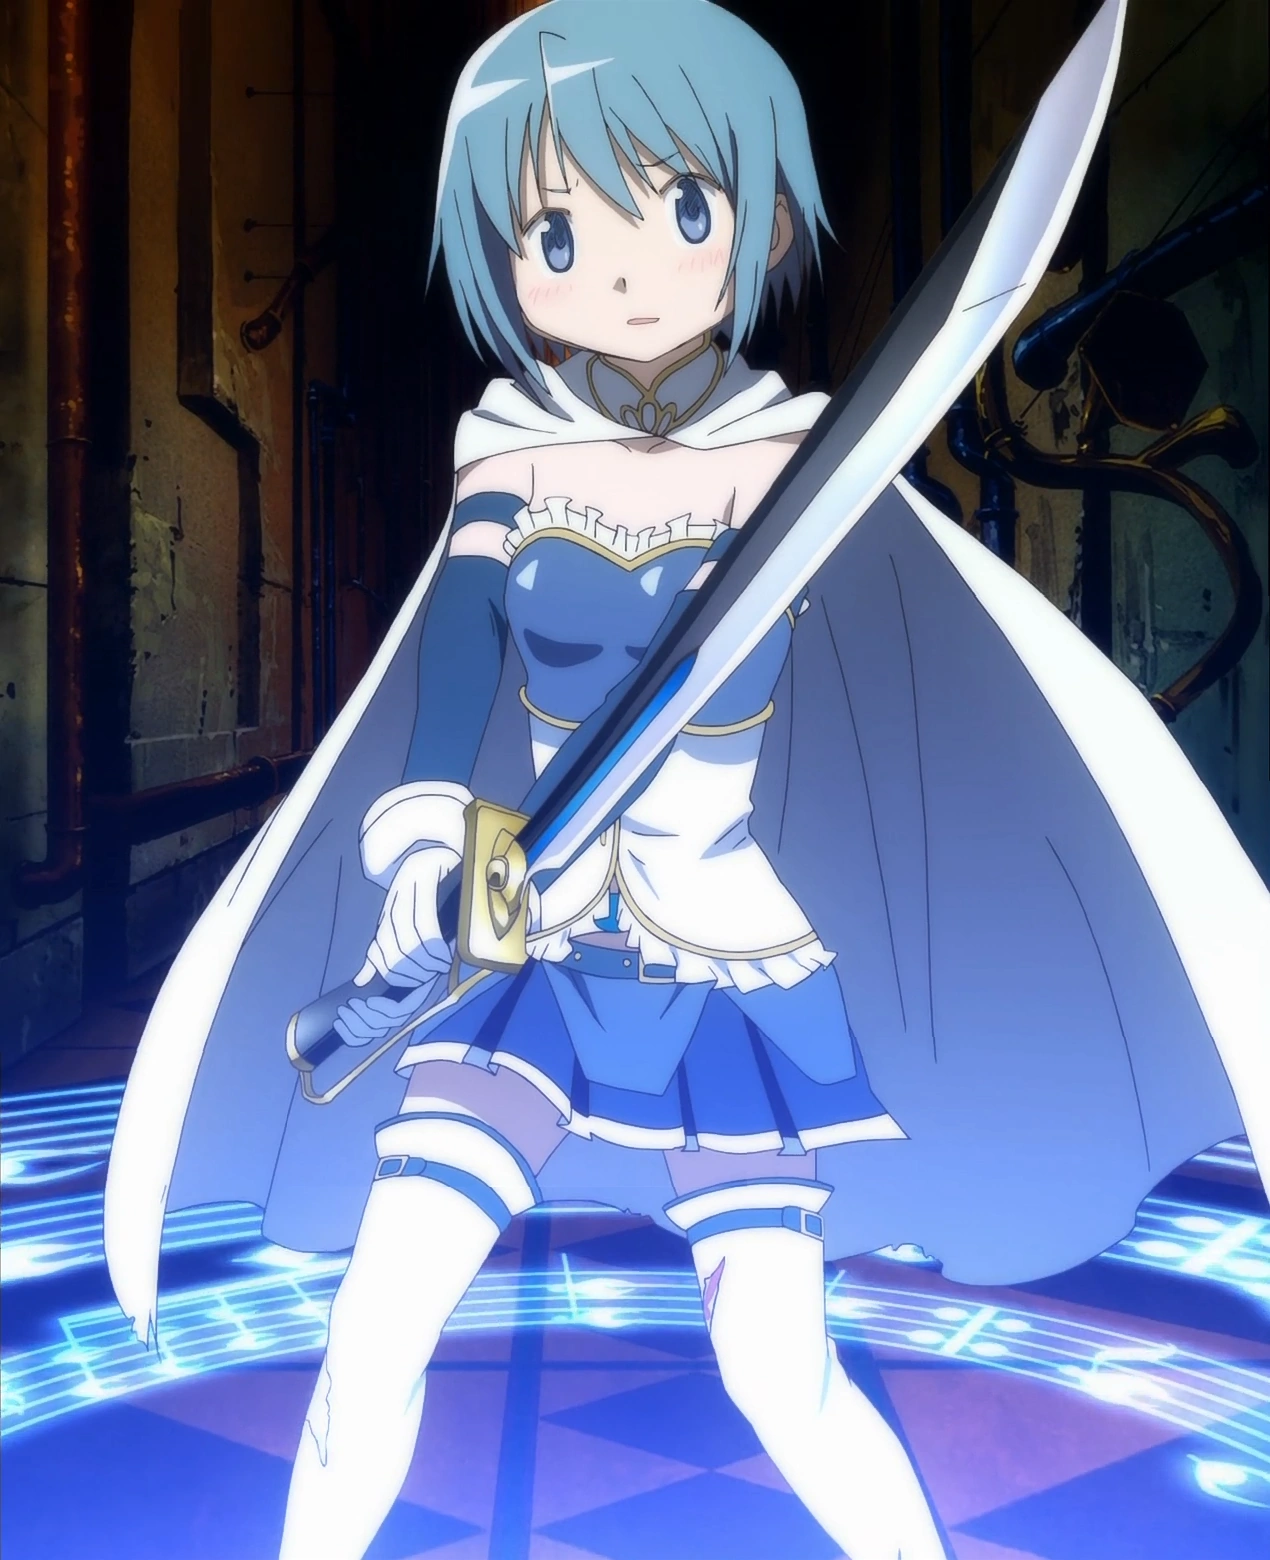 hello — Do you have any favorite magical girl weapons?